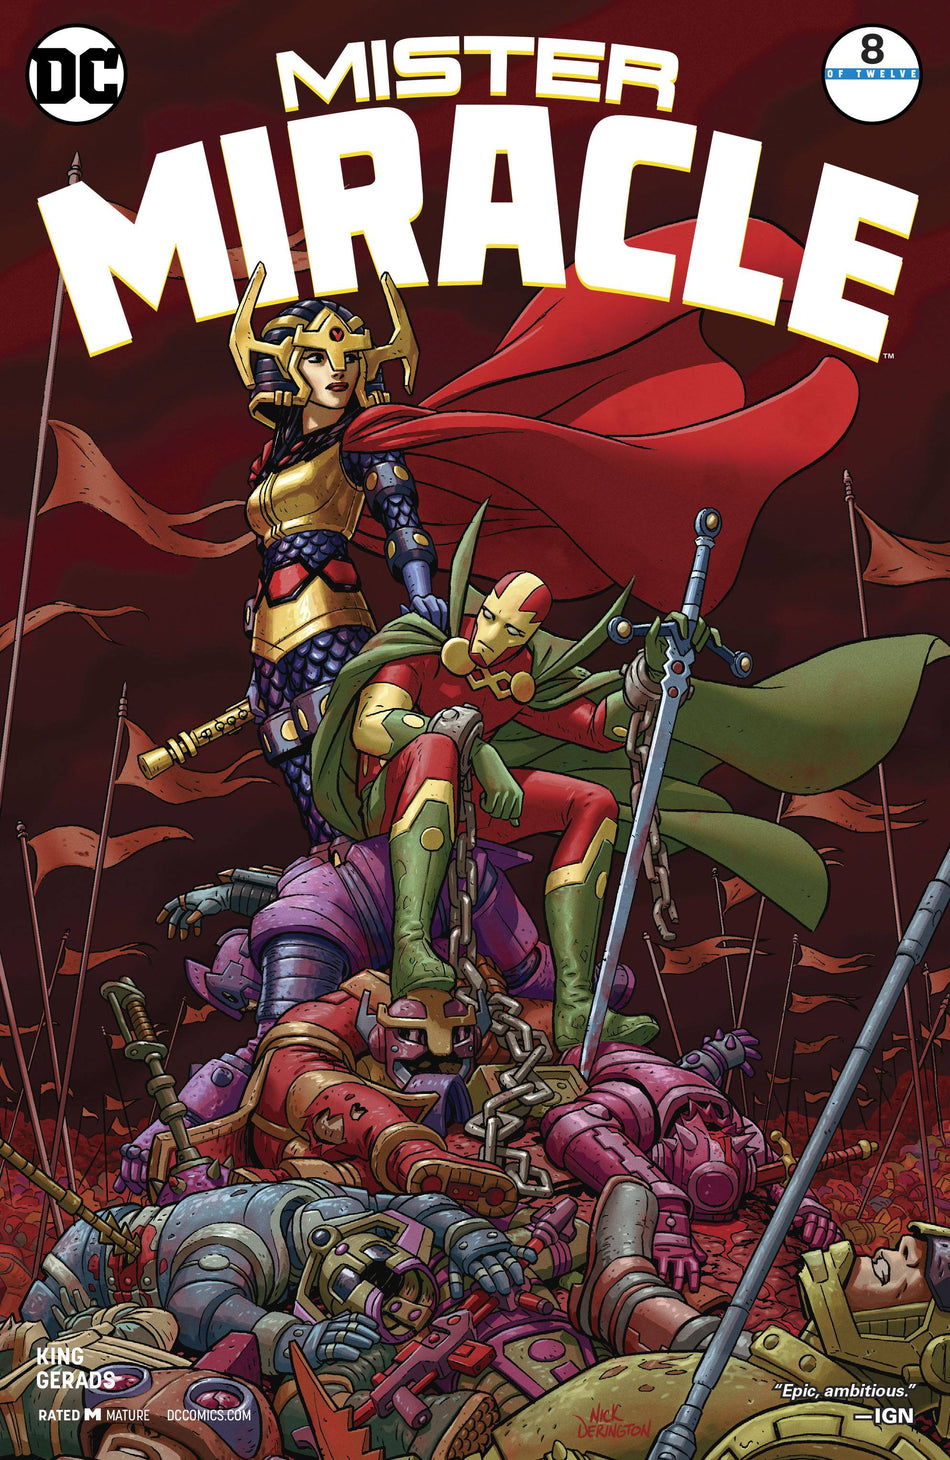 Image of Mister Miracle Issue 8 (of 12) comic Sold by Stronghold Collectibles